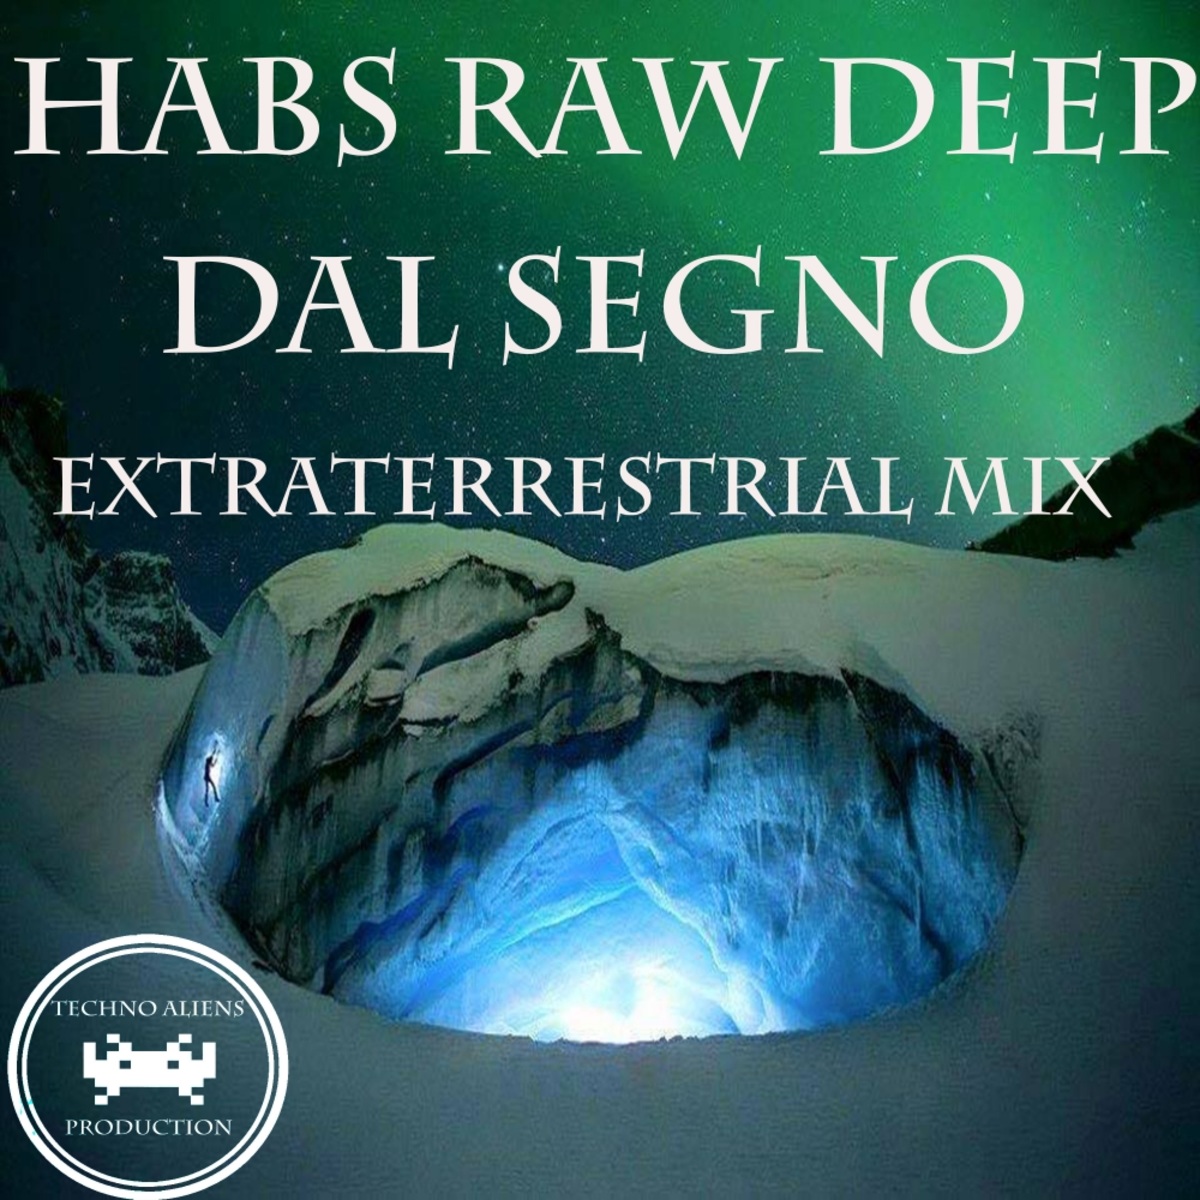 Habs Raw Deep - Dal Segno (Extraterrestrial Mix) / Techno Aliens Production